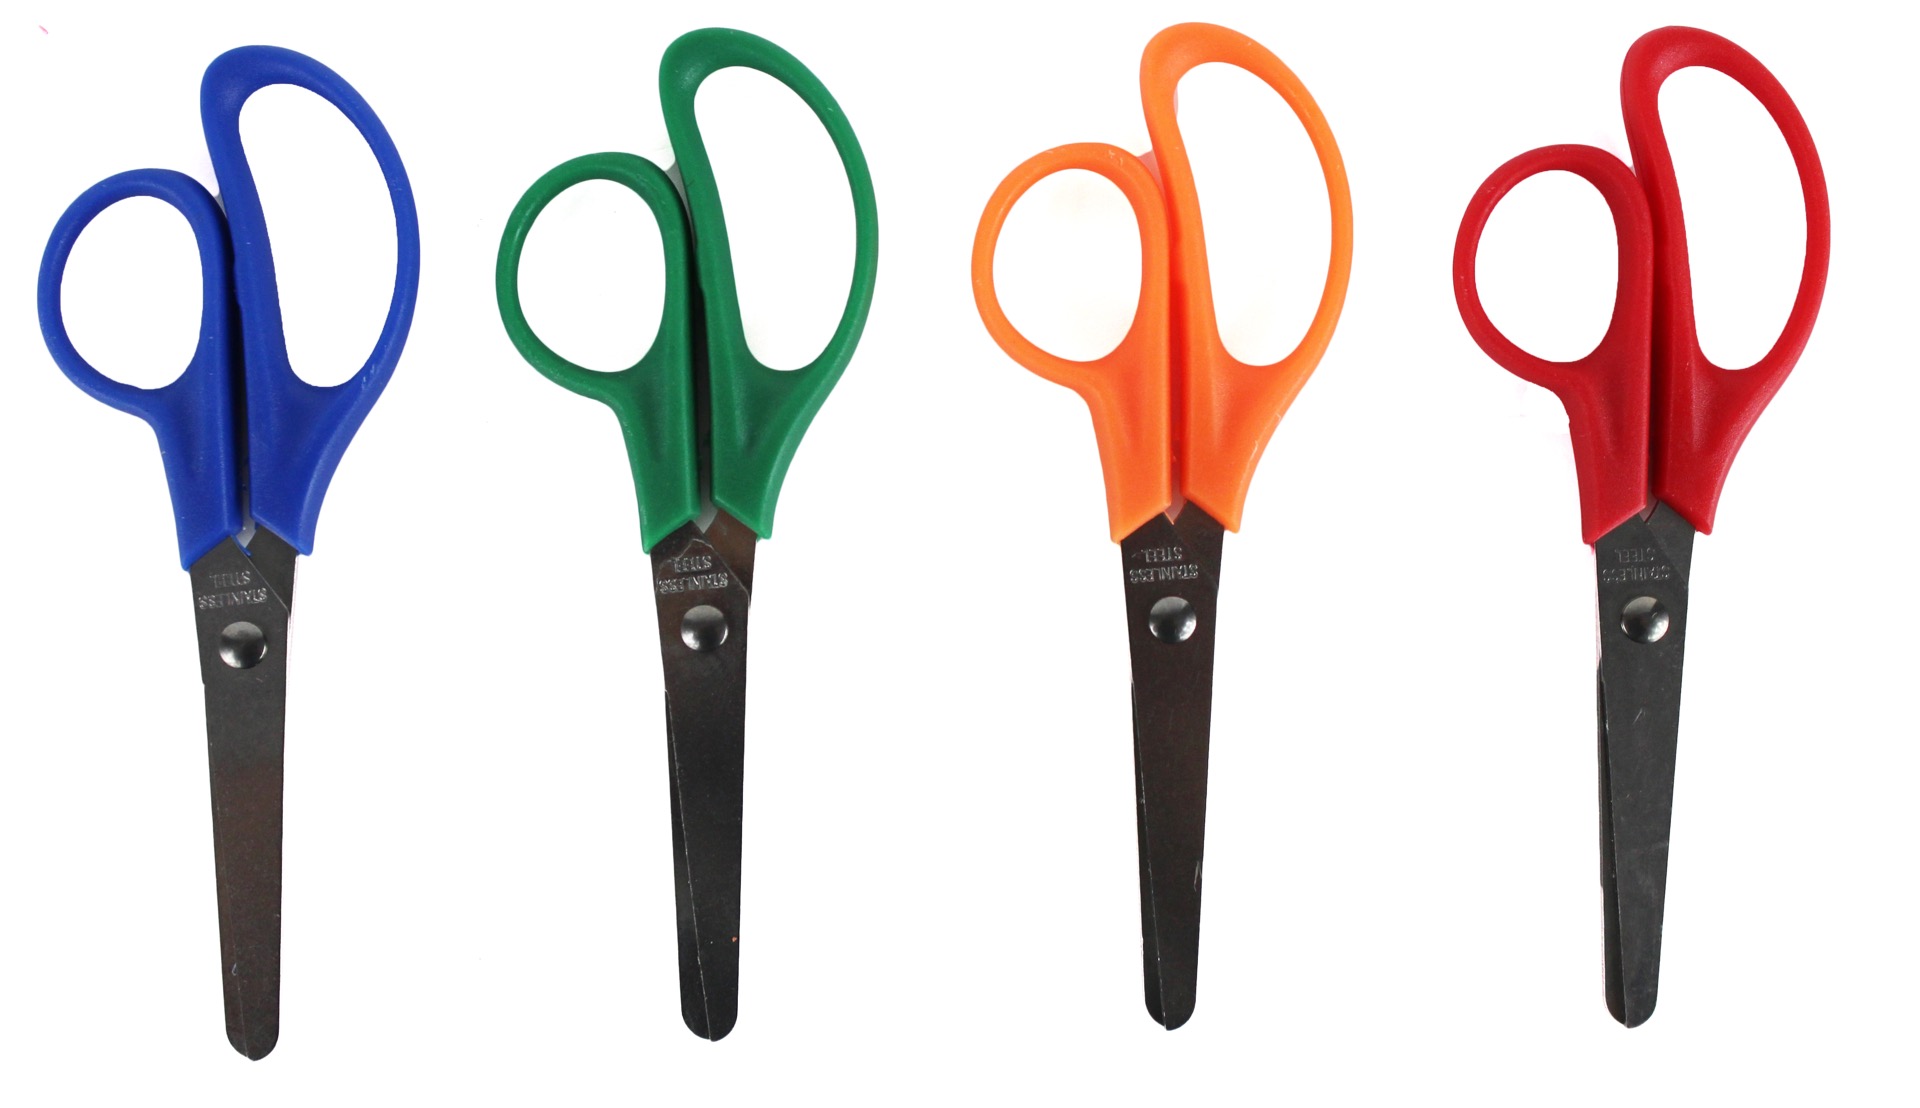 Wholesale 5 Safety Scissors - Assorted Colors - DollarDays